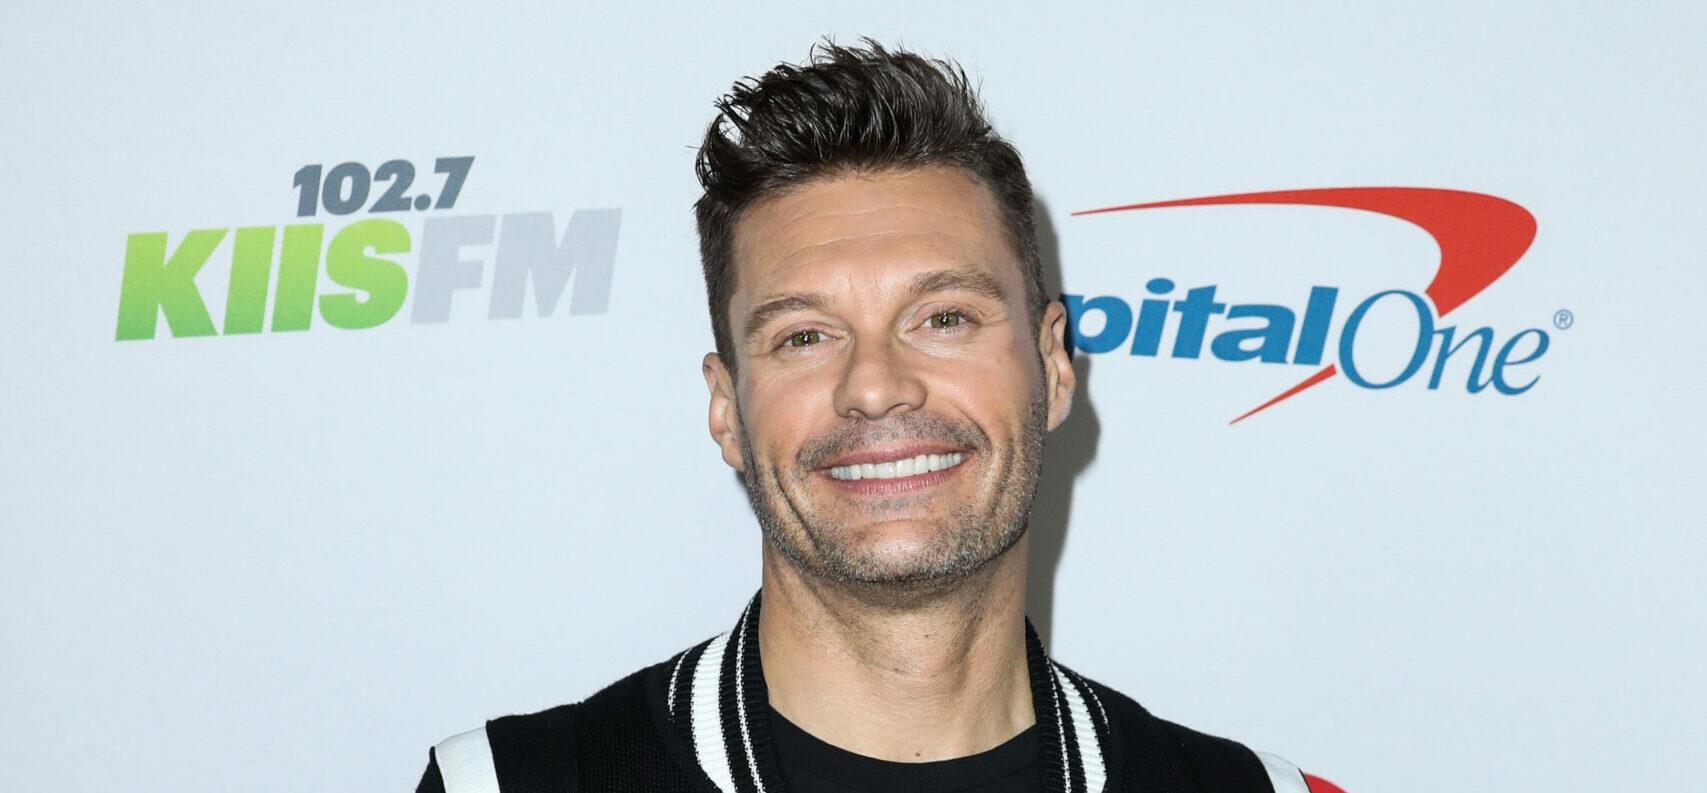 (FILE) Ryan Seacrest Donates $1 Million to First Responders in New York and Los Angeles Amid Coronavirus COVID-19 Pandemic